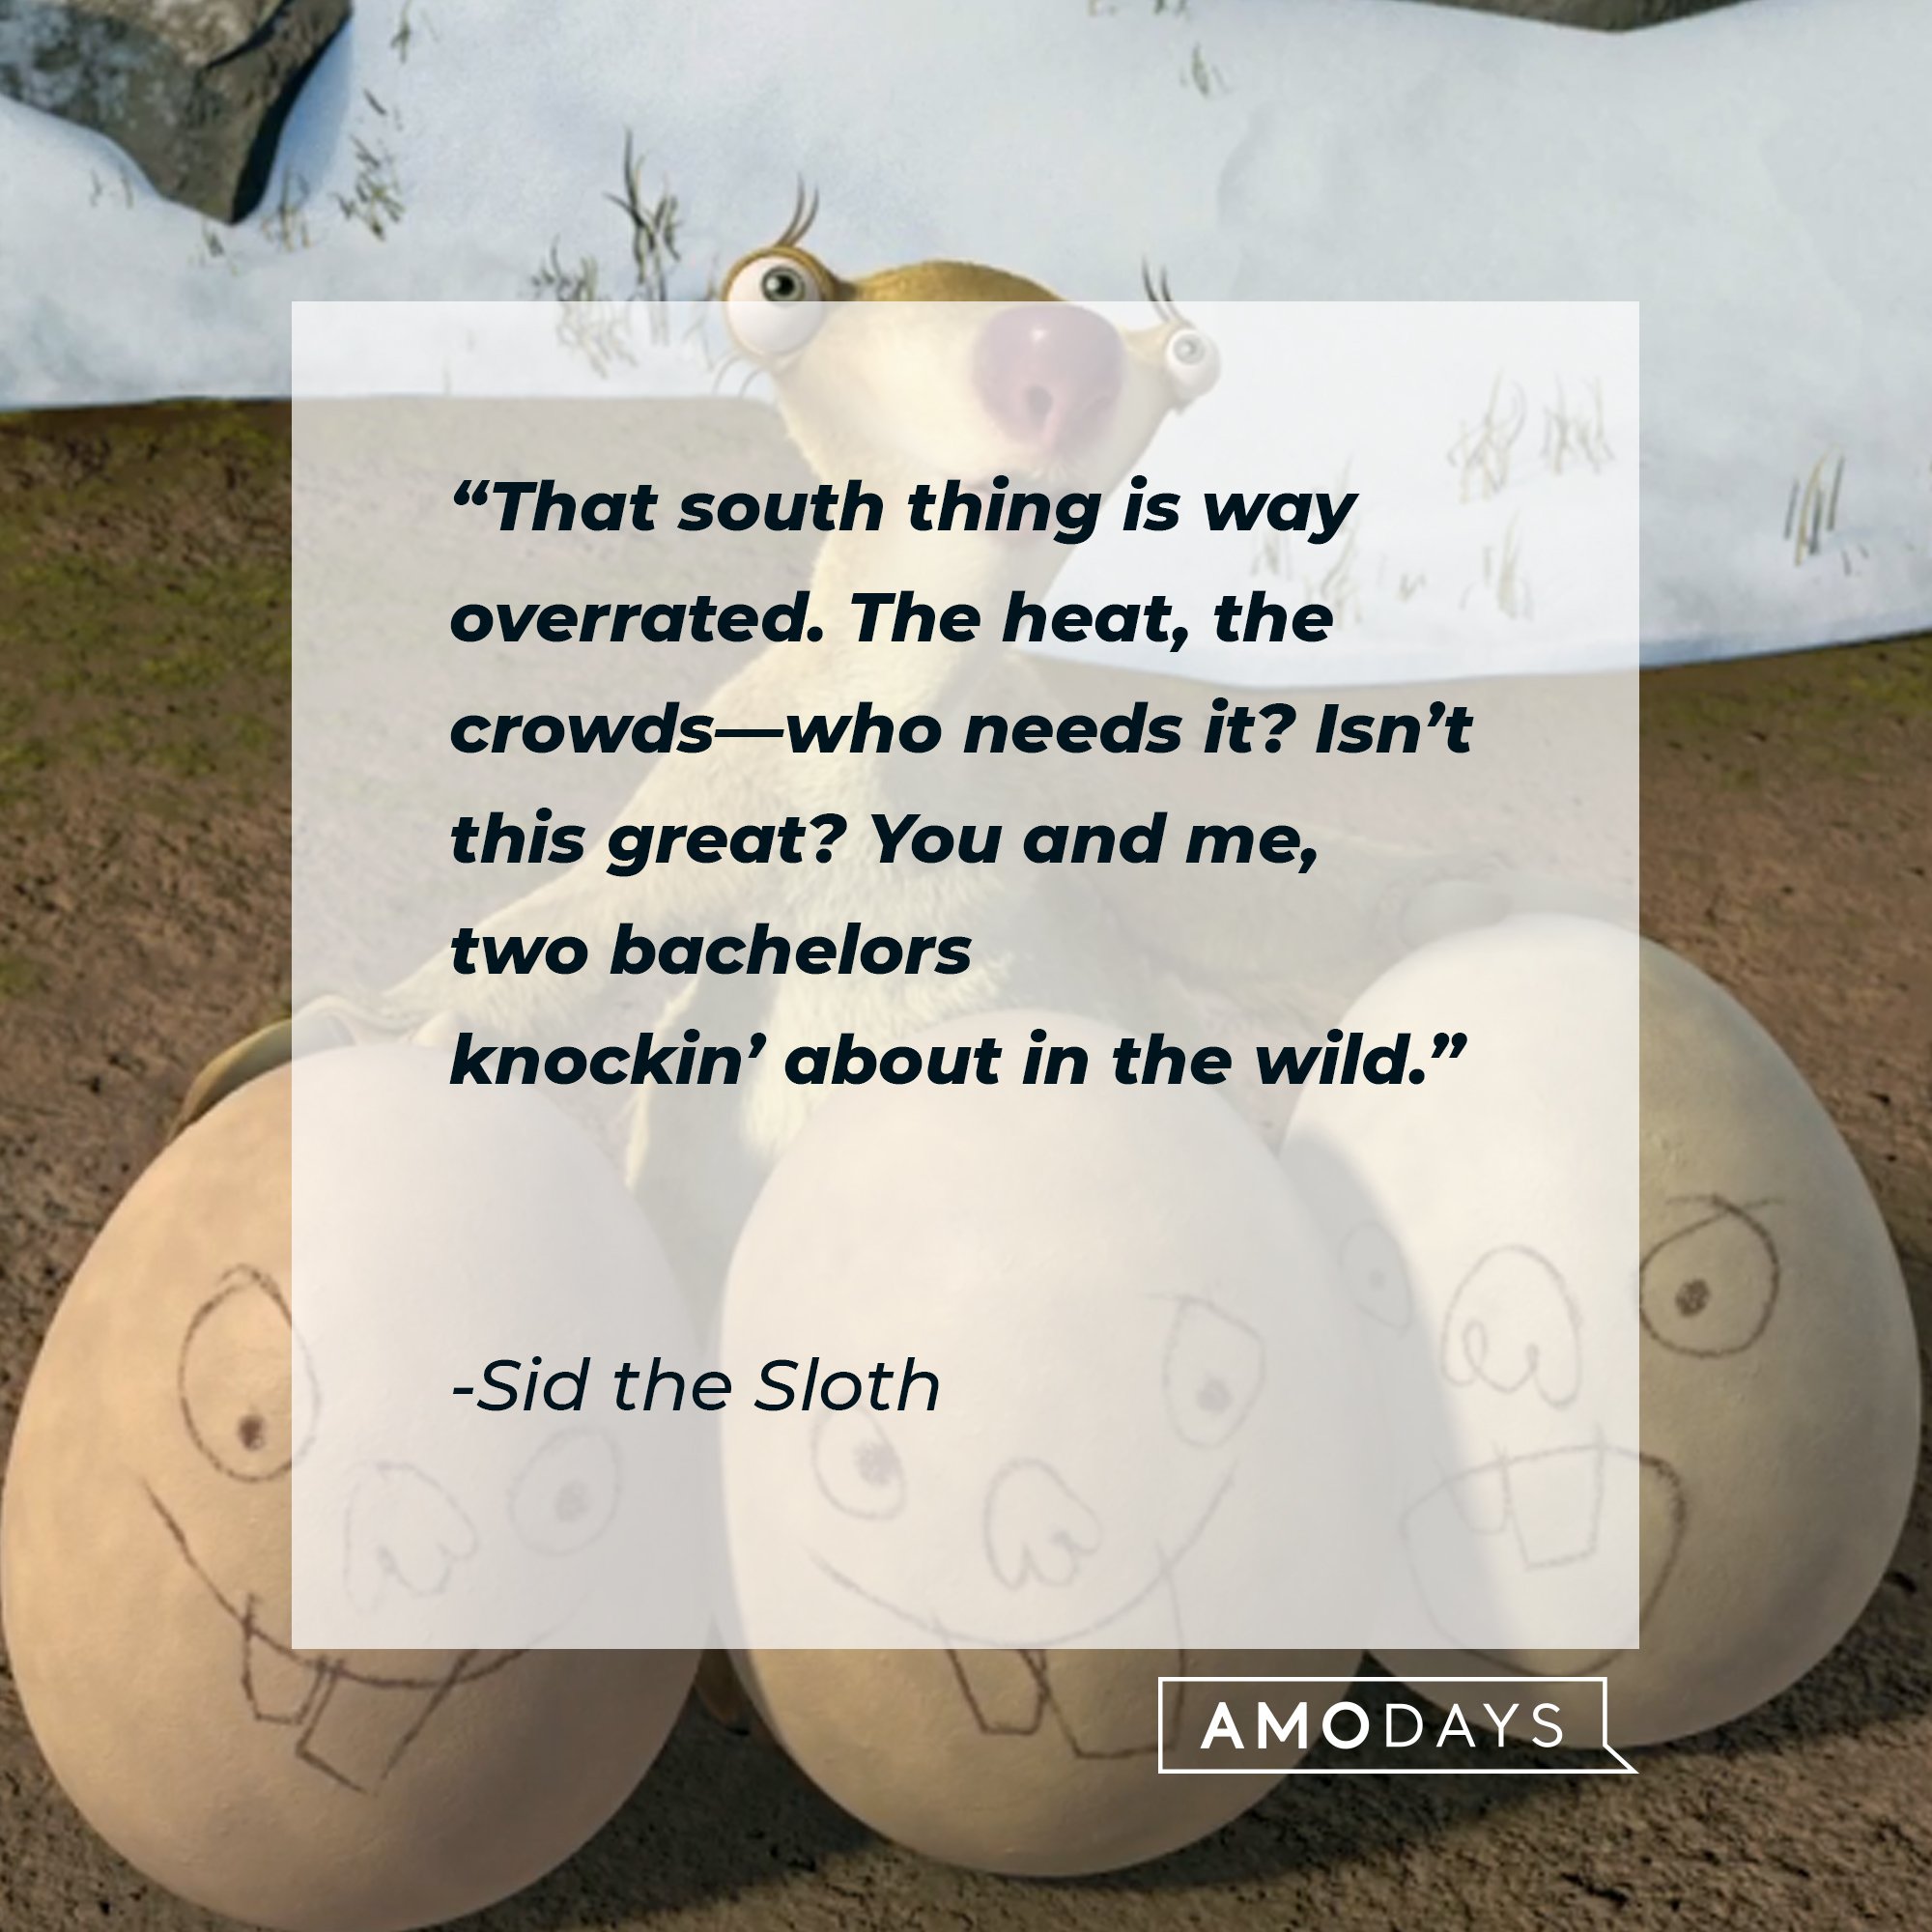 Sid the Sloth's quote: “That south thing is way overrated. The heat, the crowds—who needs it? Isn’t this great? You and me, two bachelors knockin’ about in the wild.” | Image: AmoDays